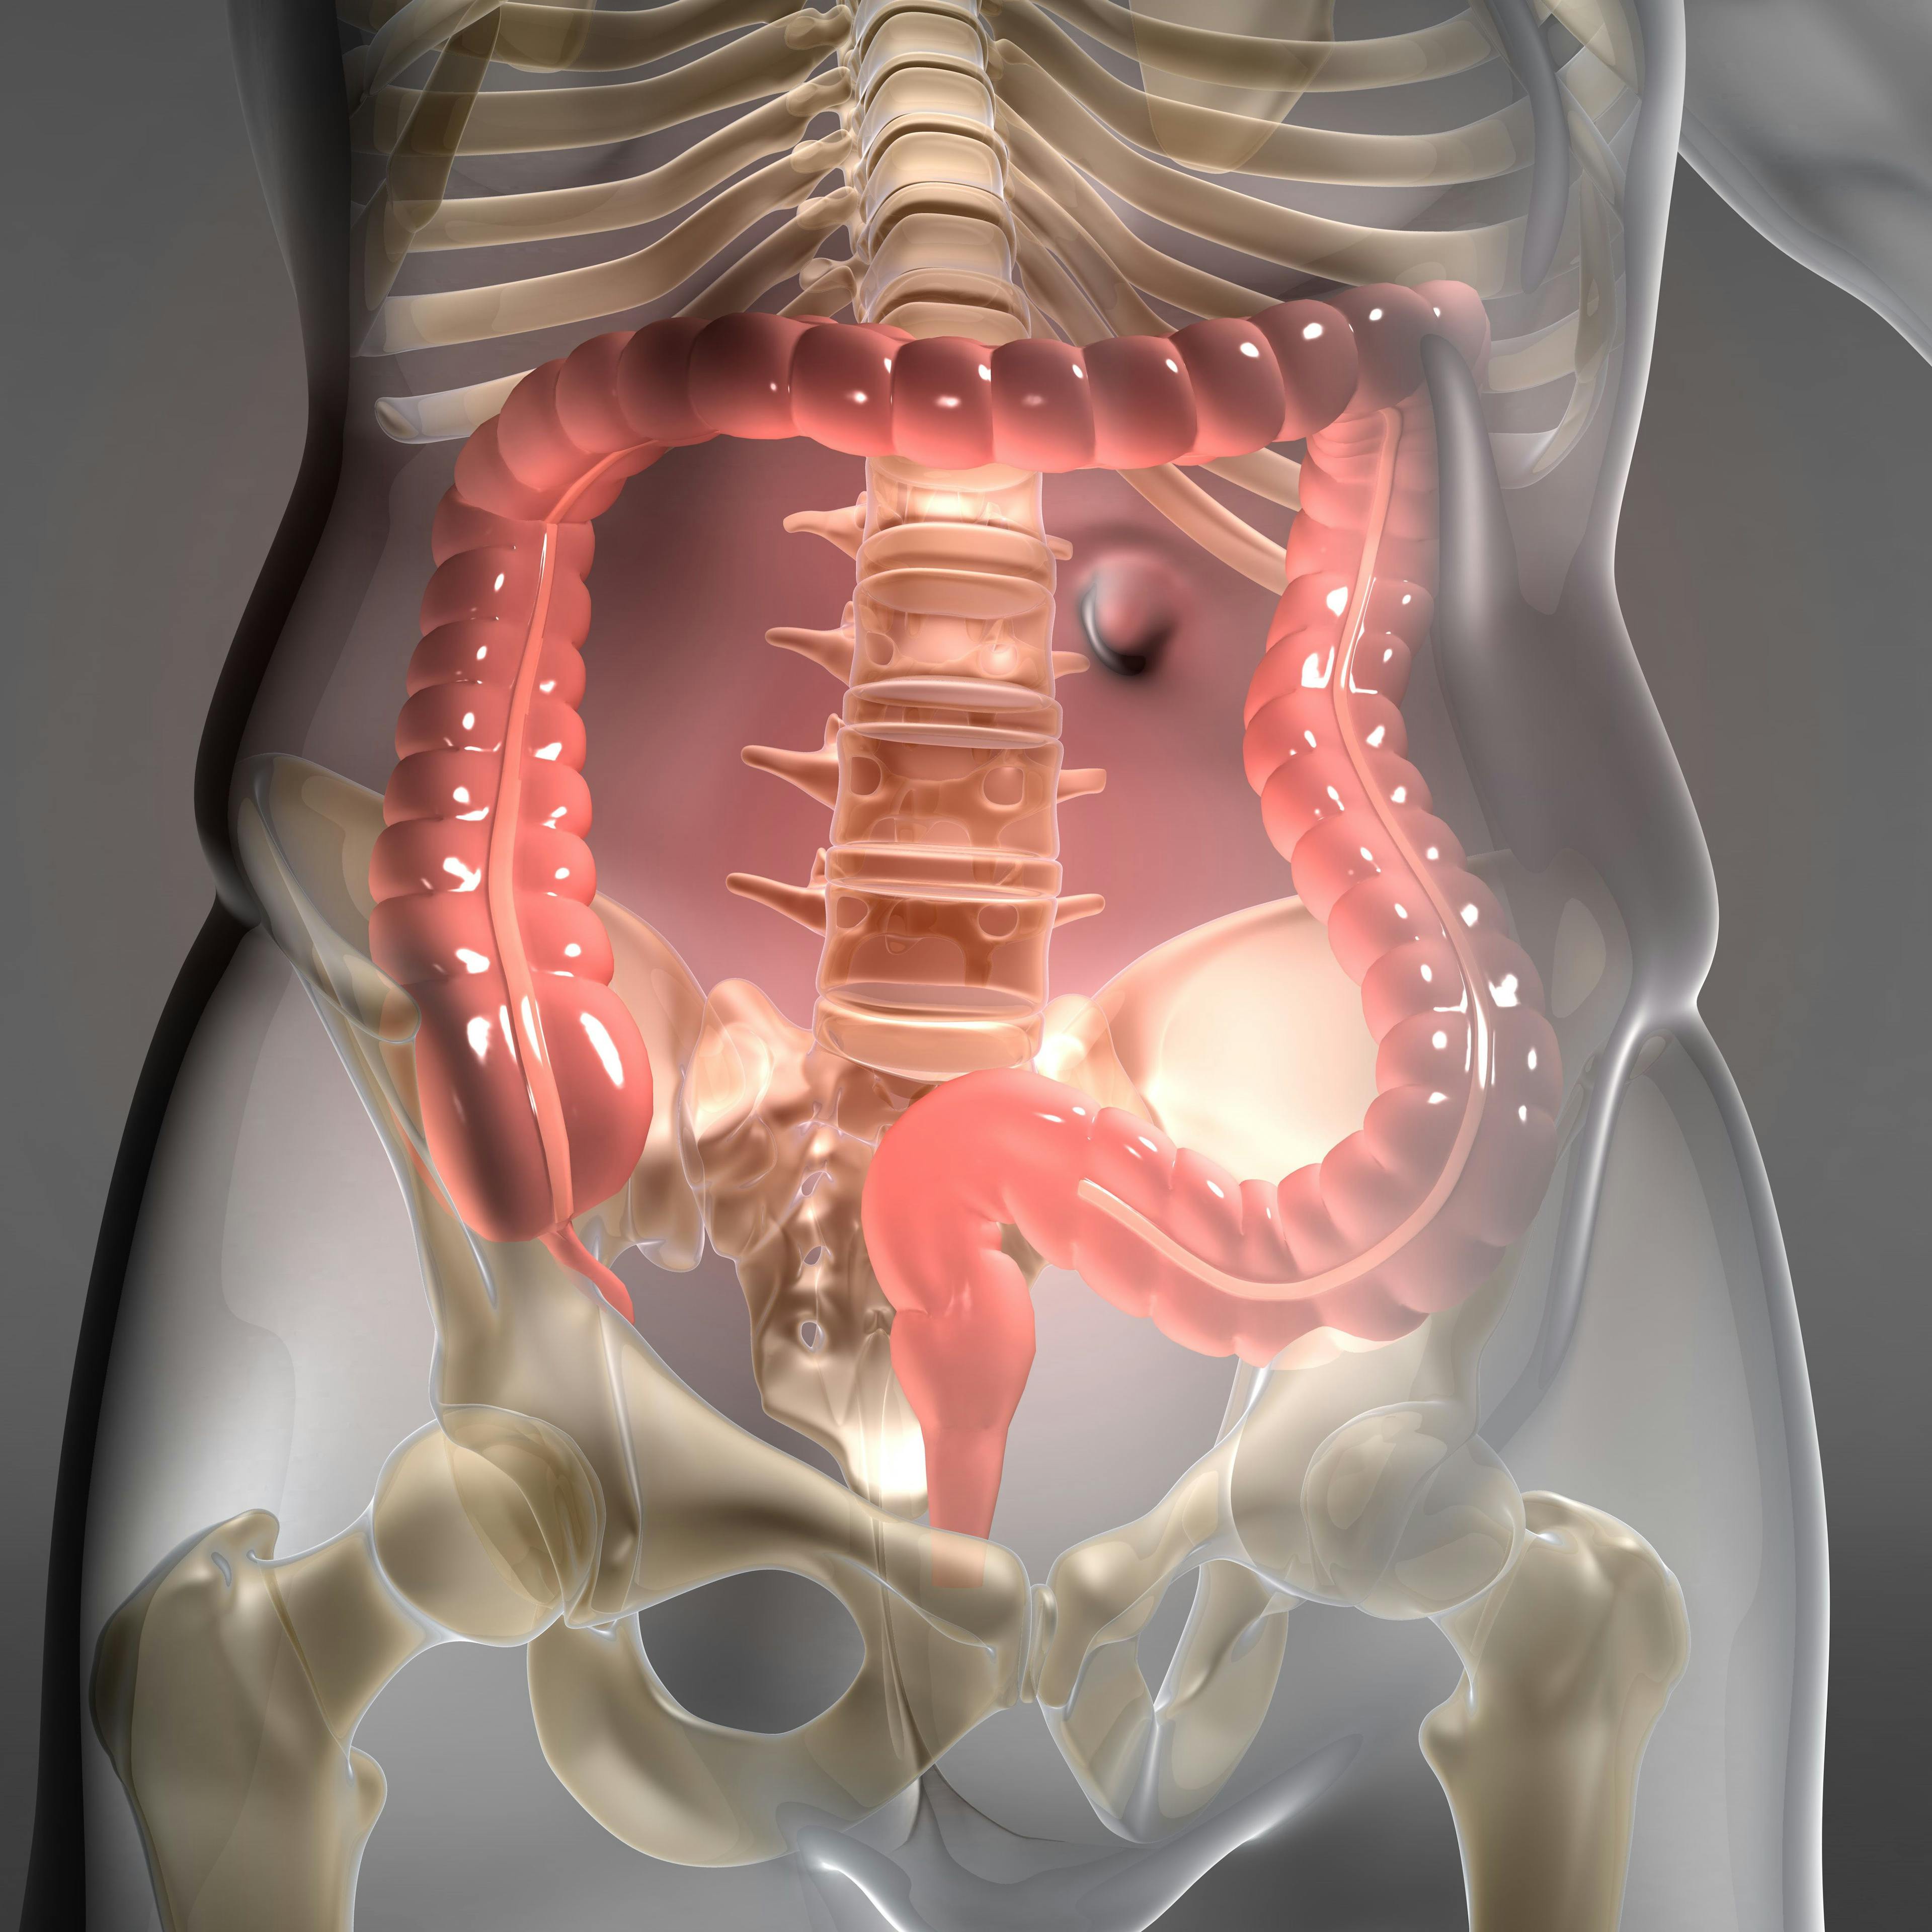 "These data support adagrasib and cetuximab as a new potential standard of care [SOC] for patients with previously treated metastatic KRAS G12C[–mutant] colorectal cancer and will hopefully support a new SOC in the regulatory environment," according to Scott Kopetz, MD, PhD.